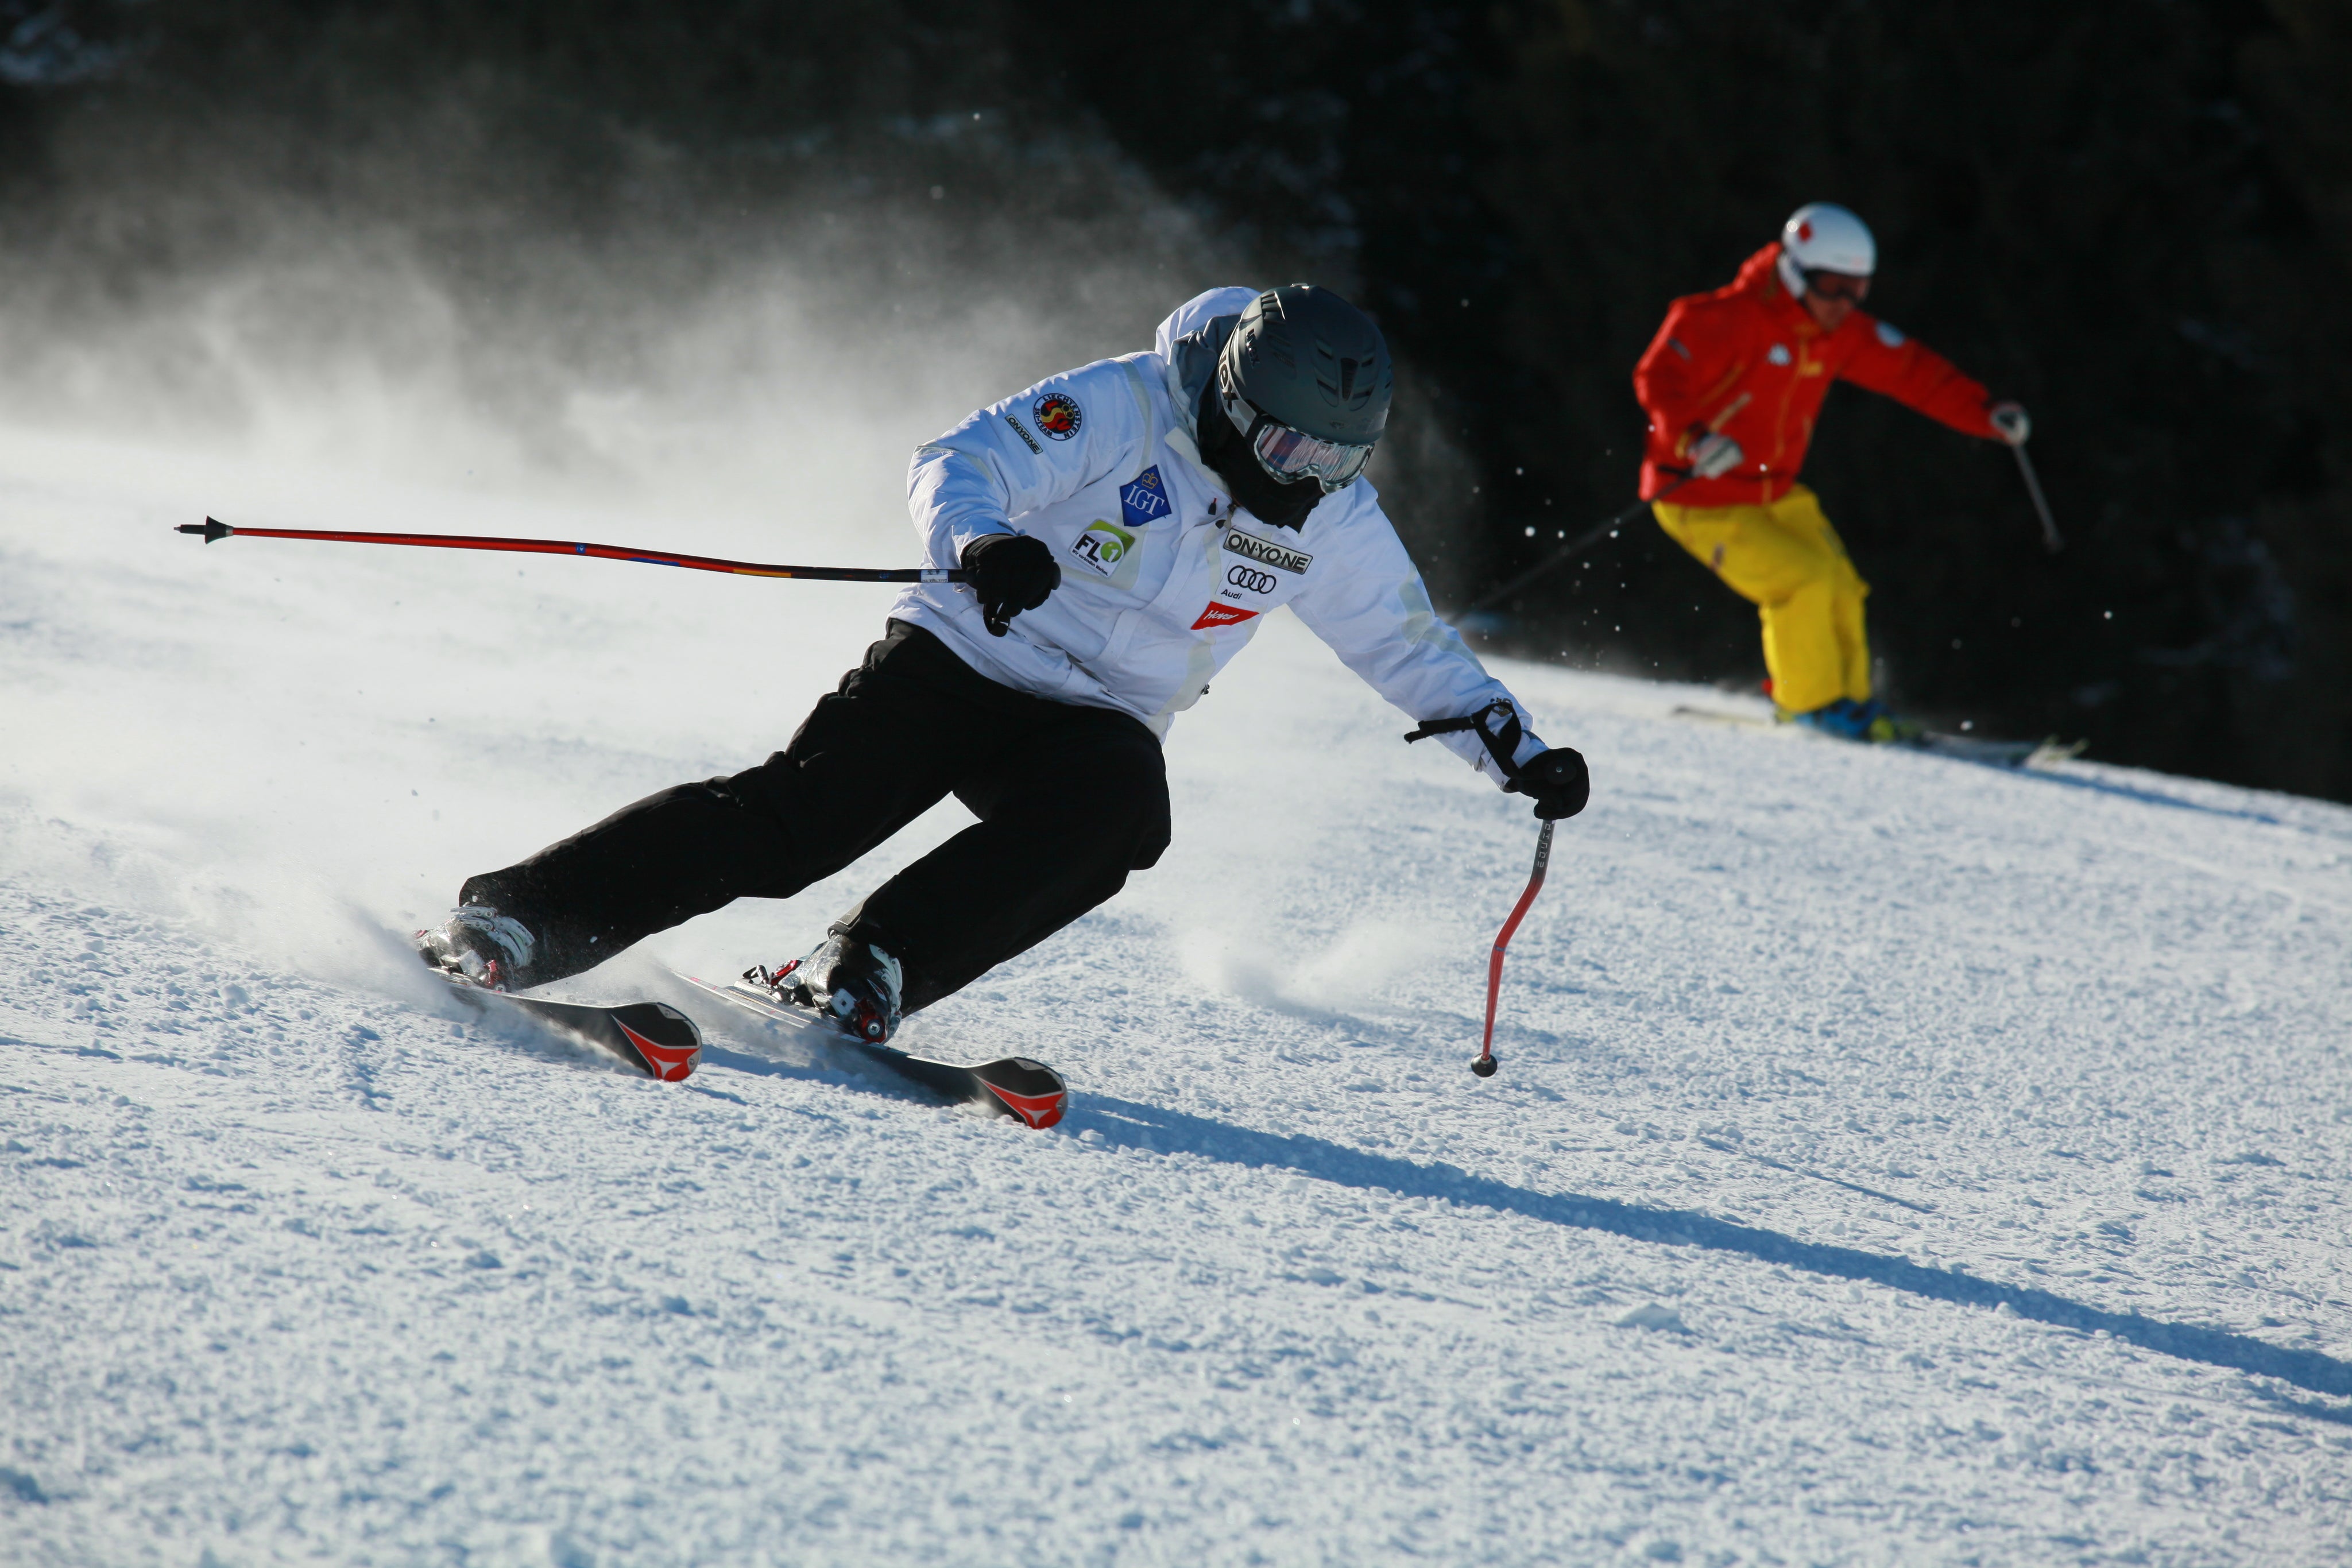 person-cuts-through-the-snow-on-skis.jpg